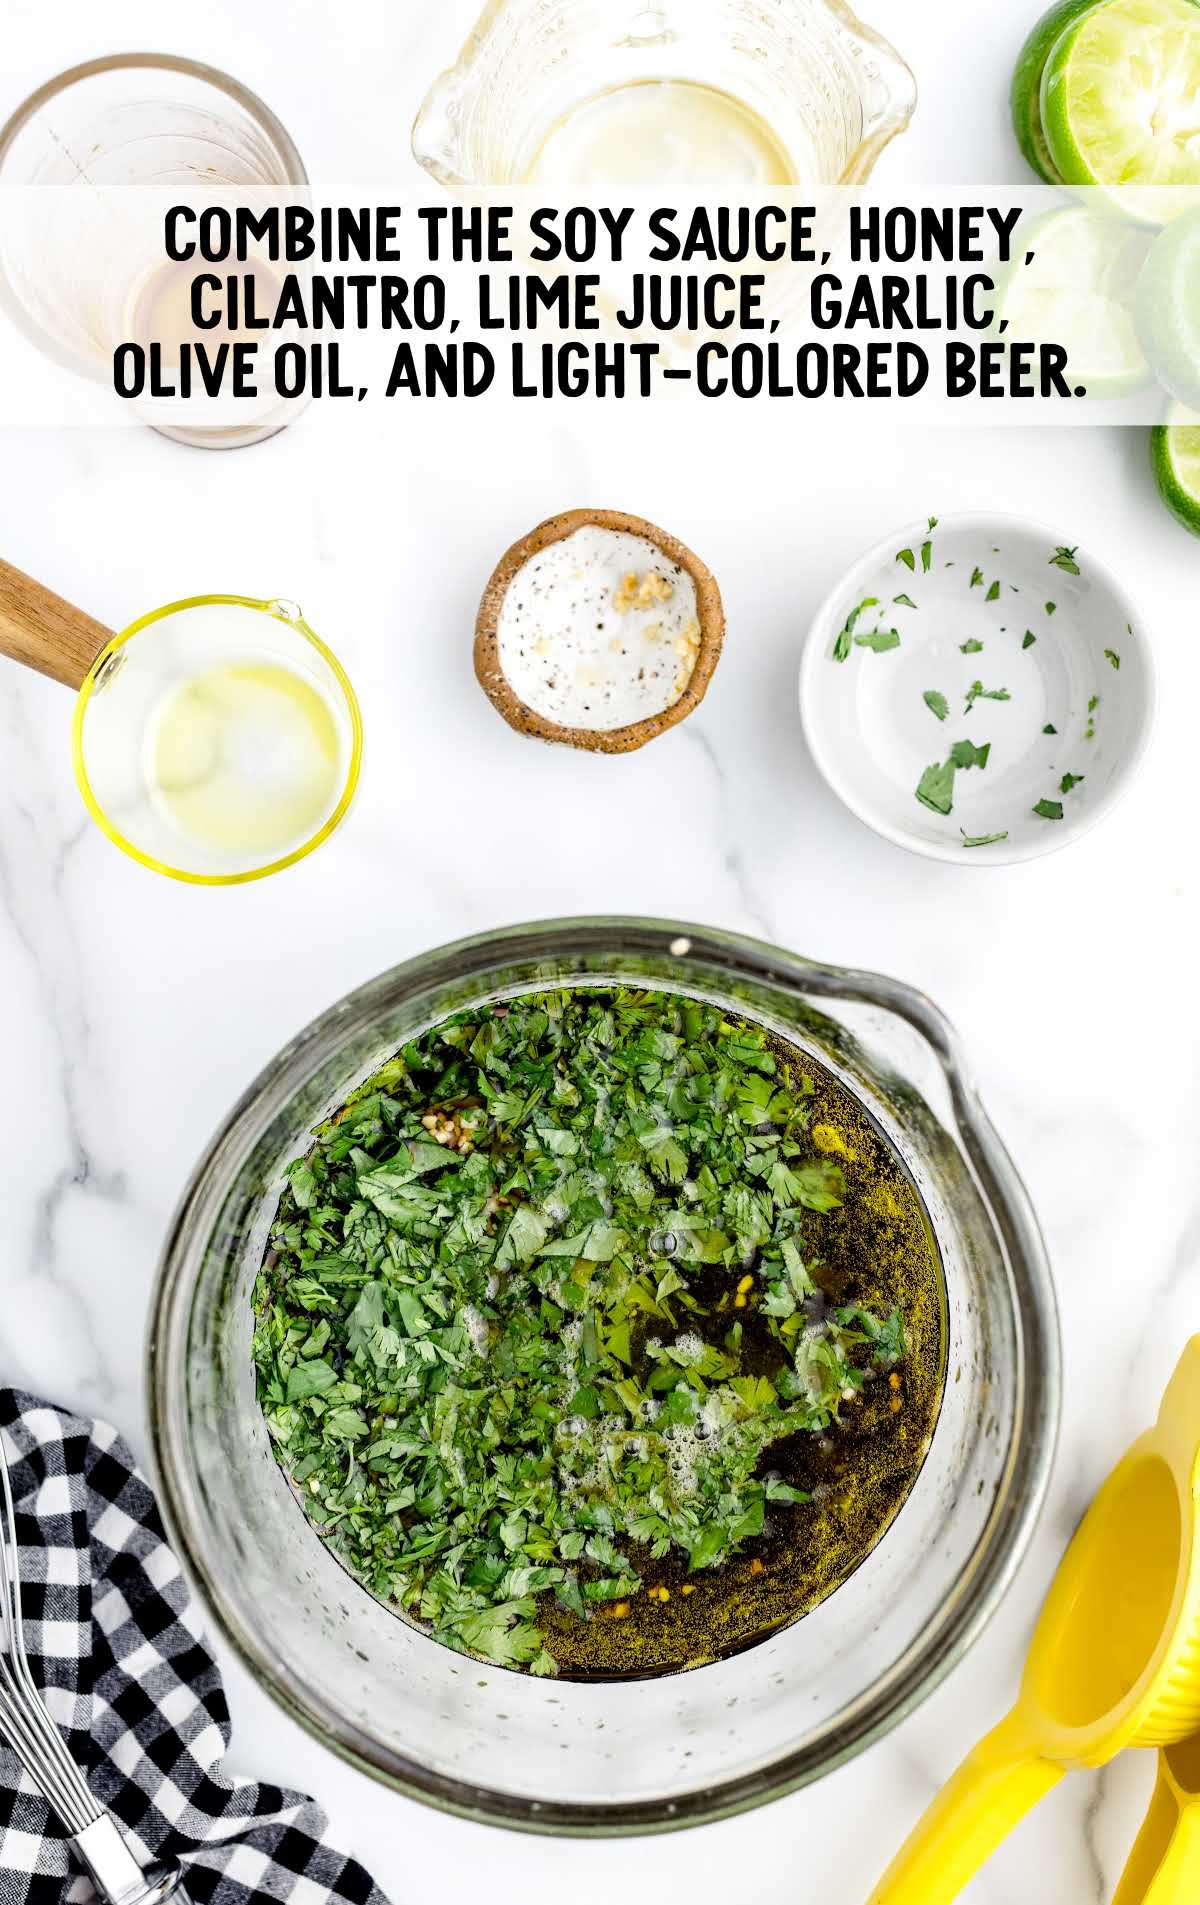 soy sauce, honey, cilantro, lime juice, garlic, olive oil, and light colored beer combined in a bowl